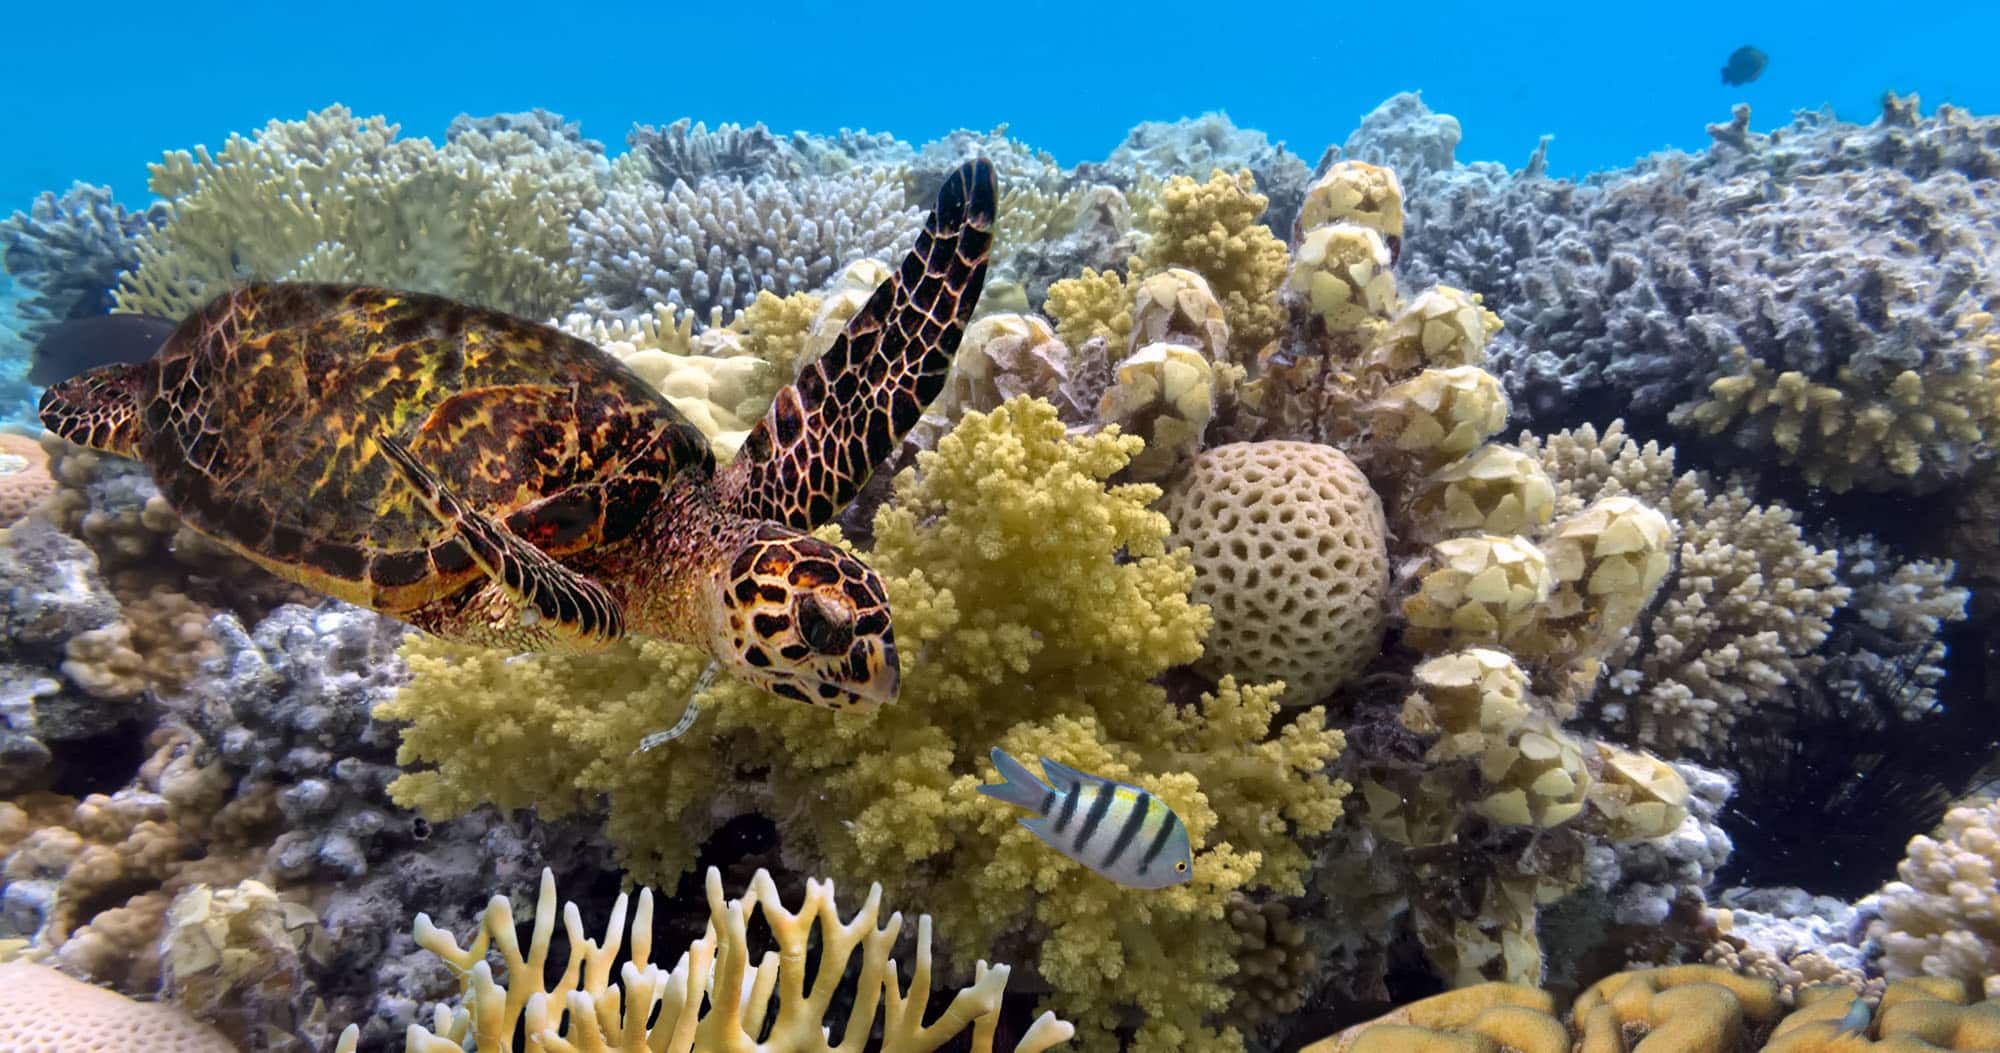 Featured image for “Liveaboard Tours of the Great Barrier Reef: The Best Way to Experience the GBR”